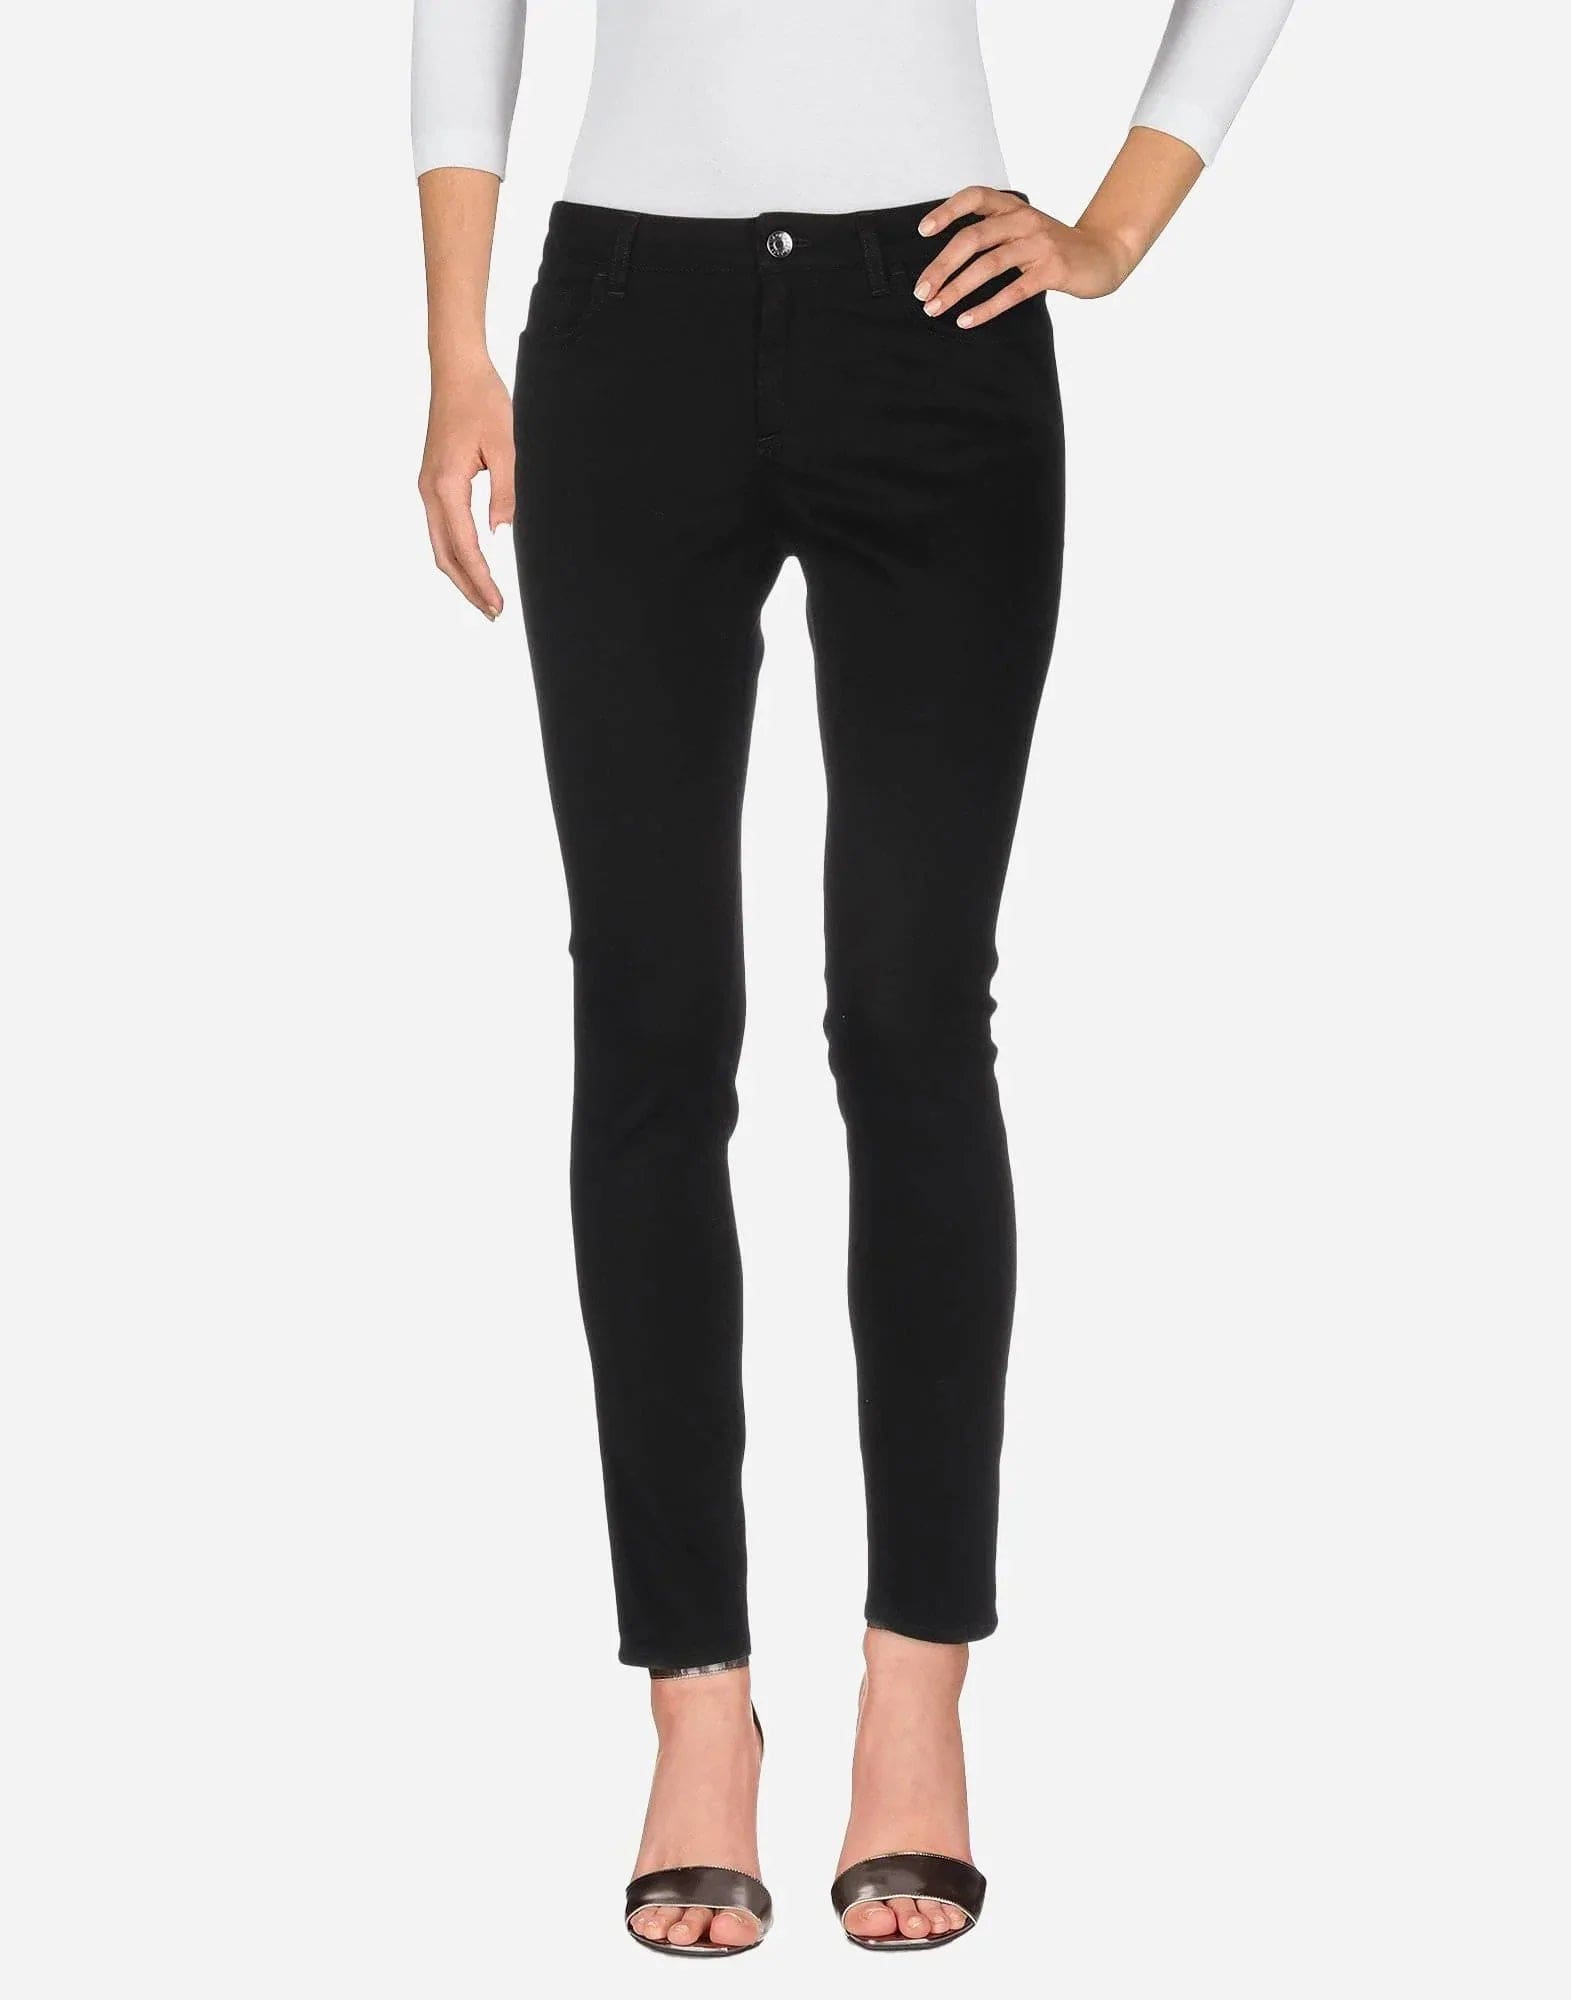 Dolce & Gabbana Heart Embroidered Skinny Jeans